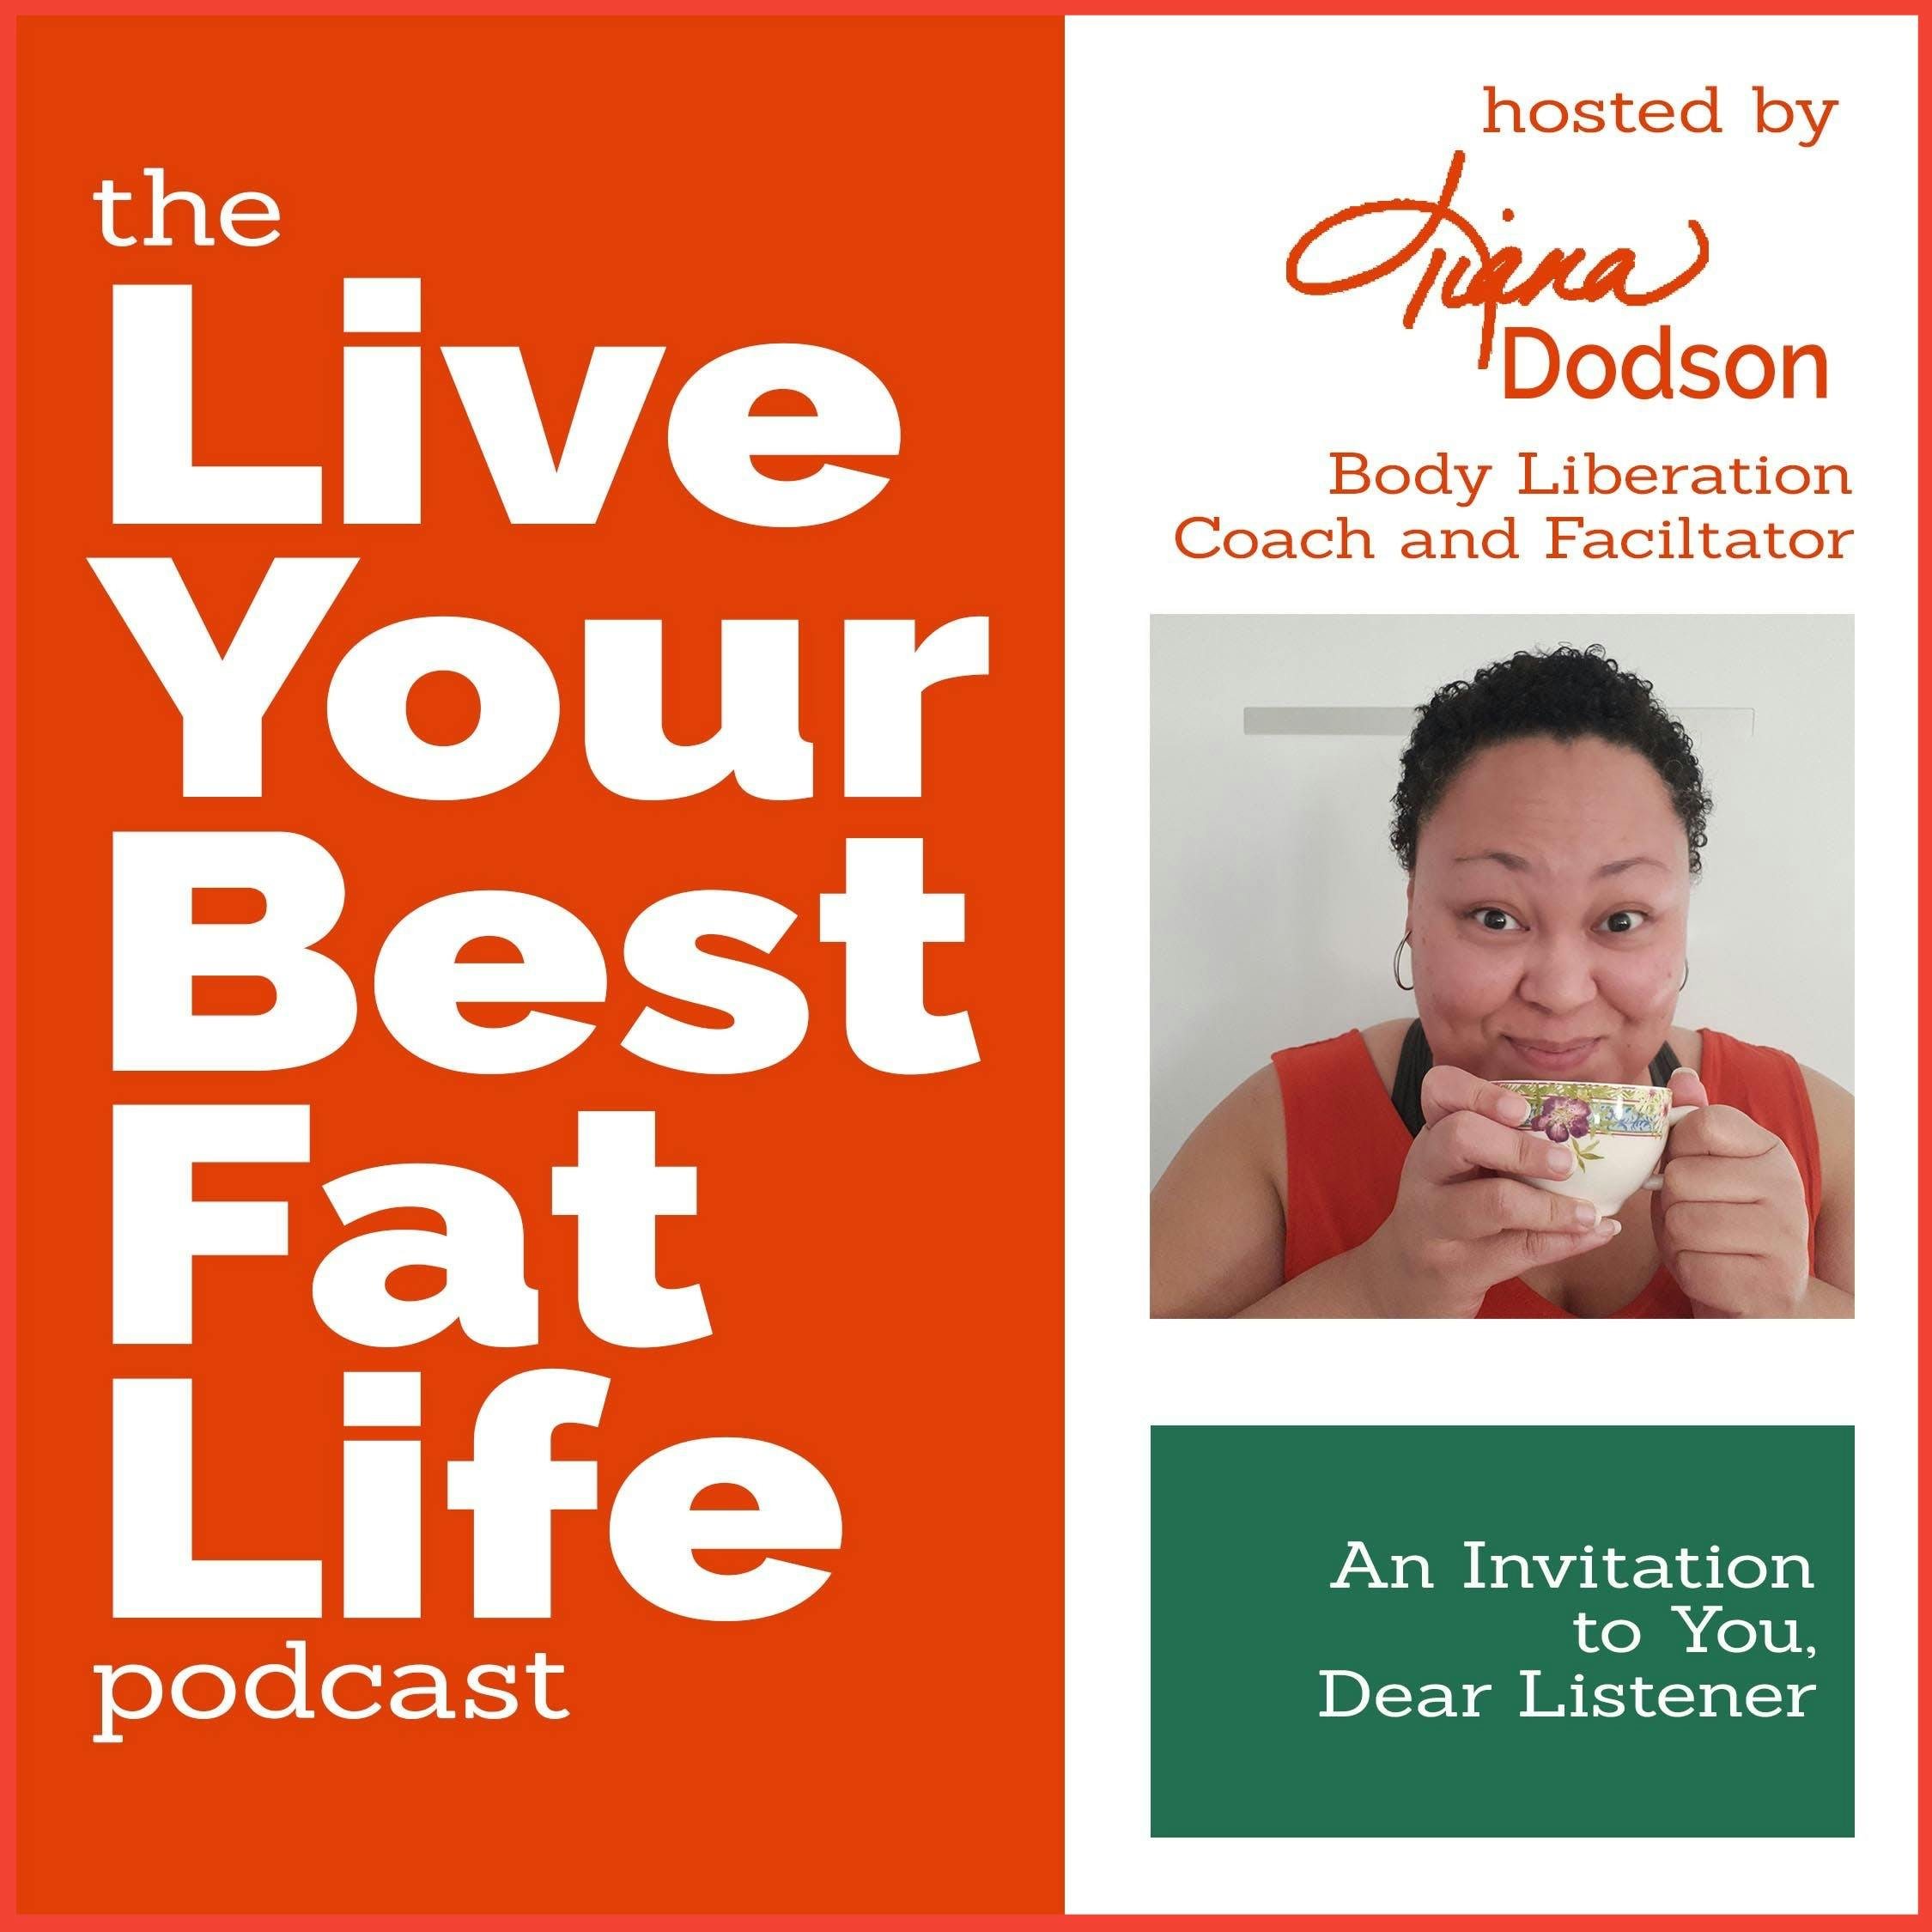 New Episode of The Live Your Best Fat Life Podcast